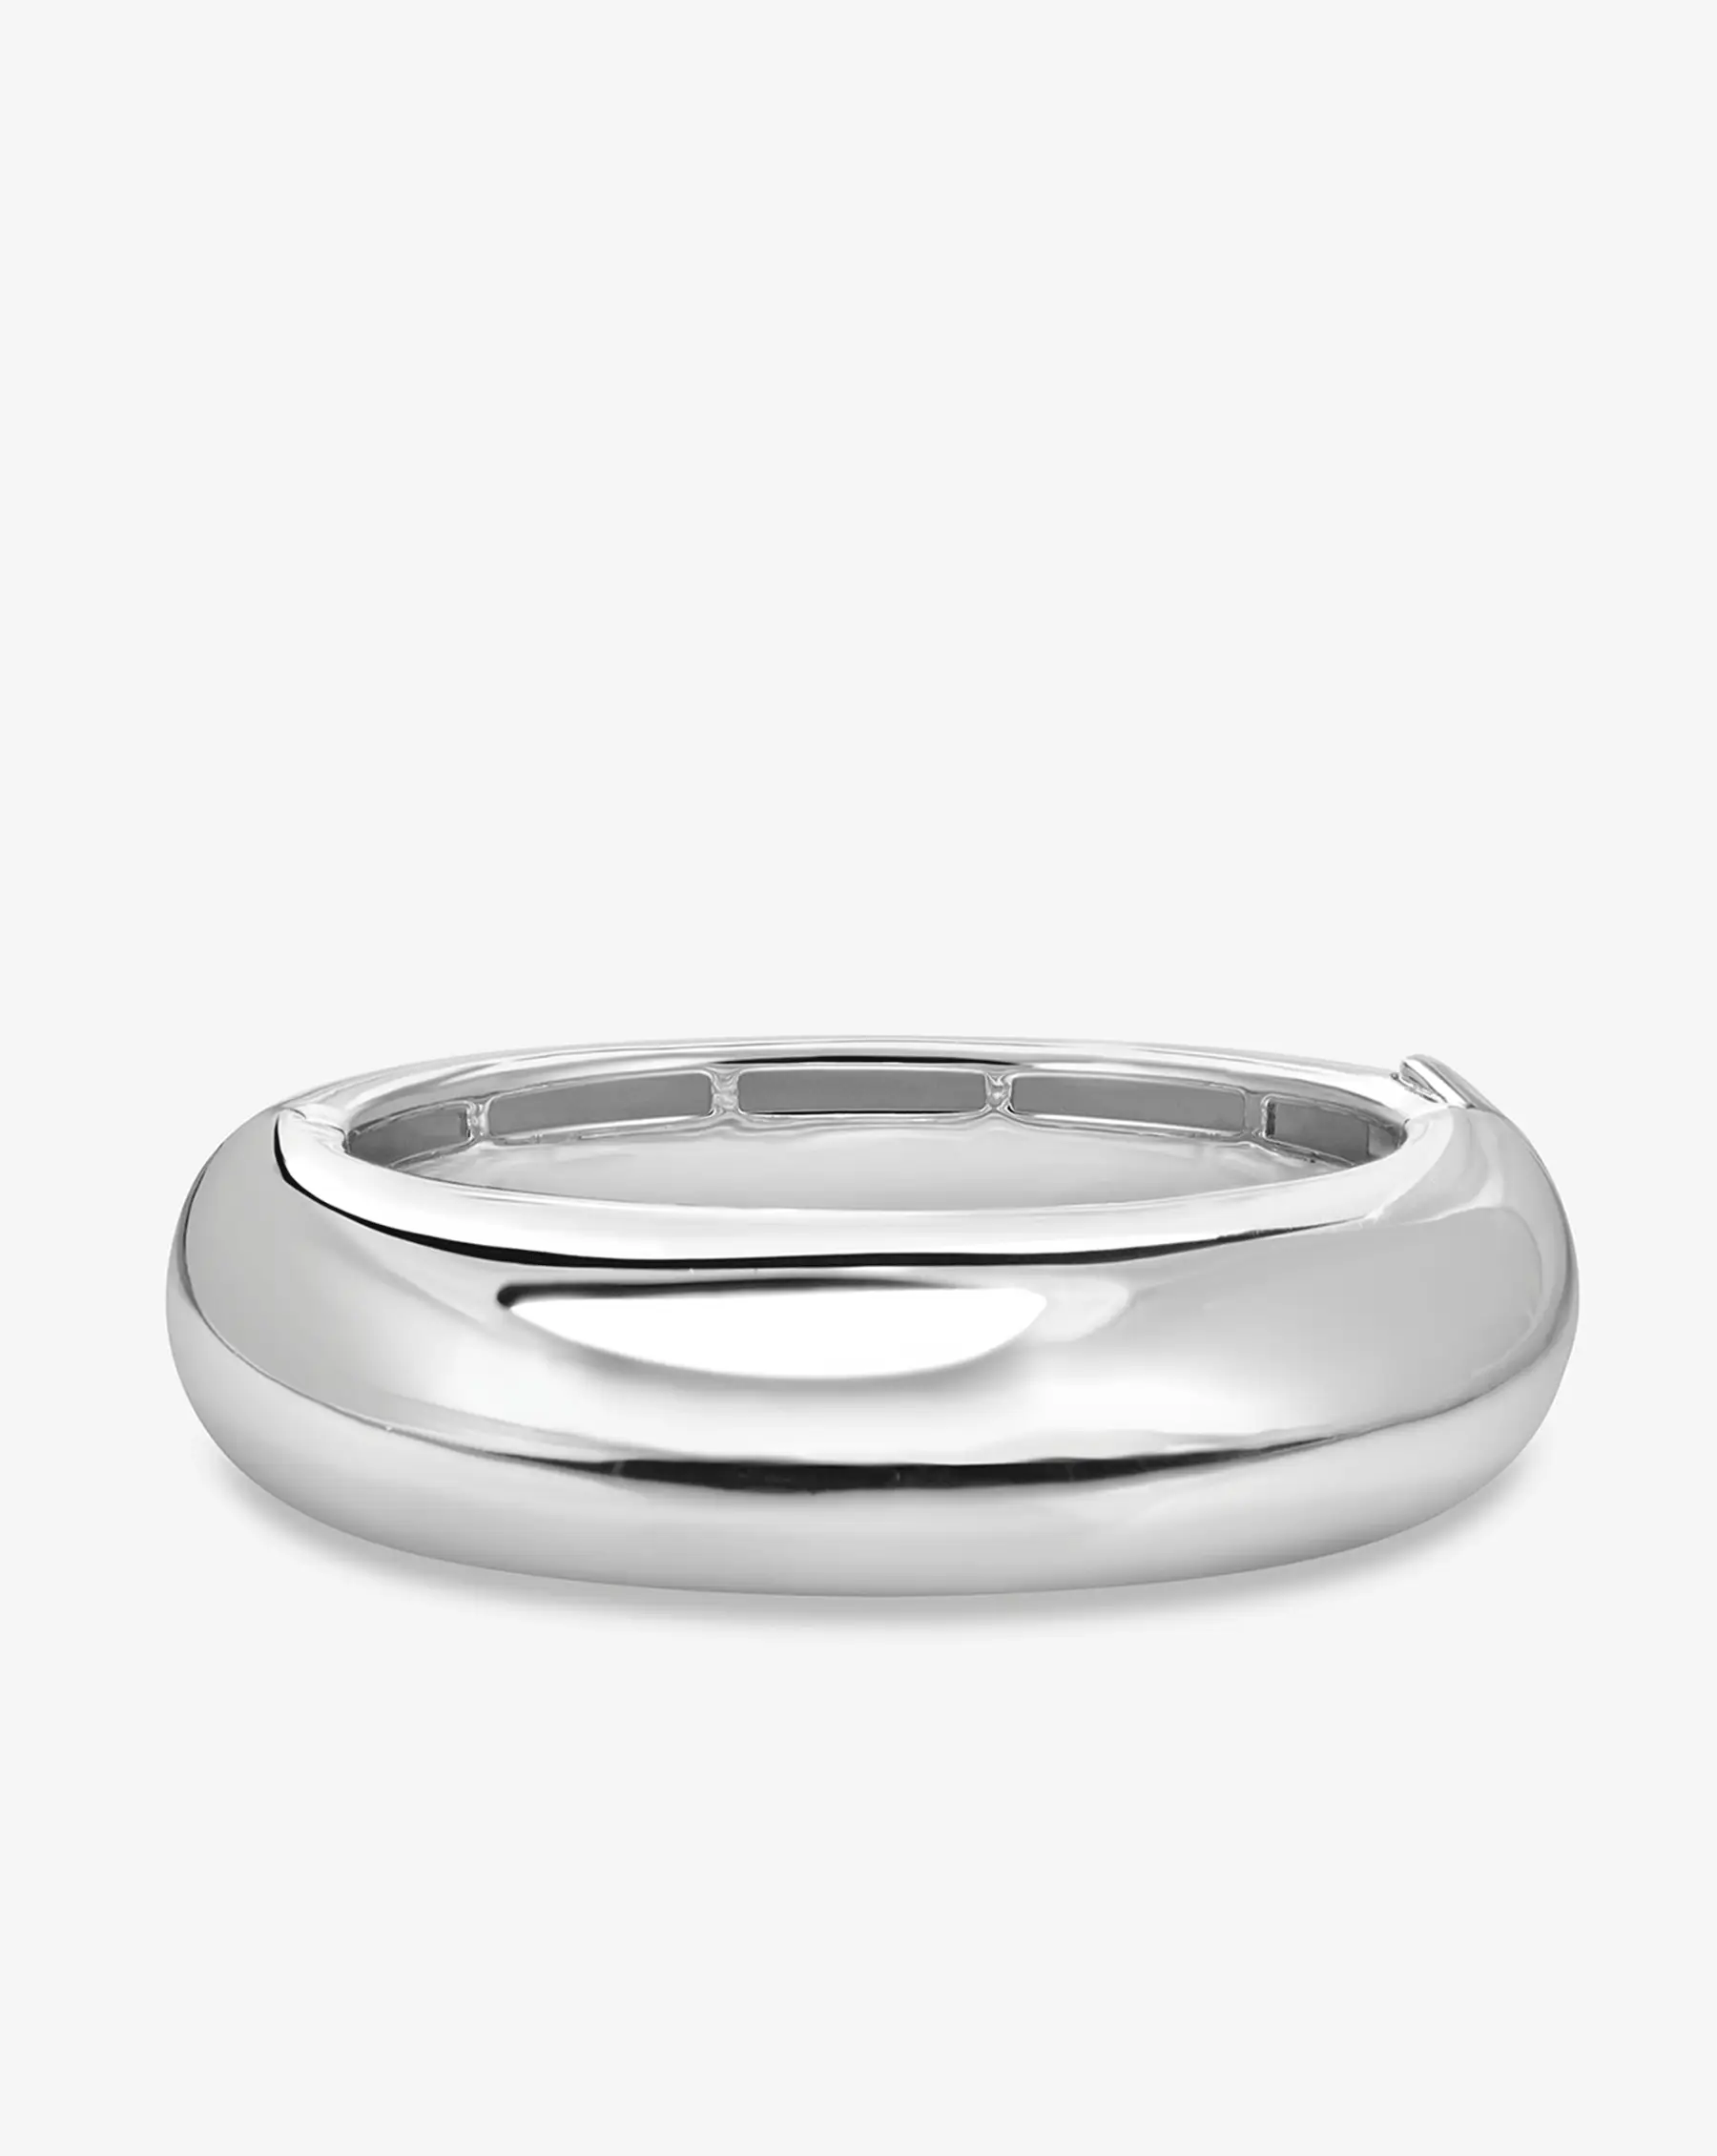 Image of Statement Sterling - Cloud Bangle